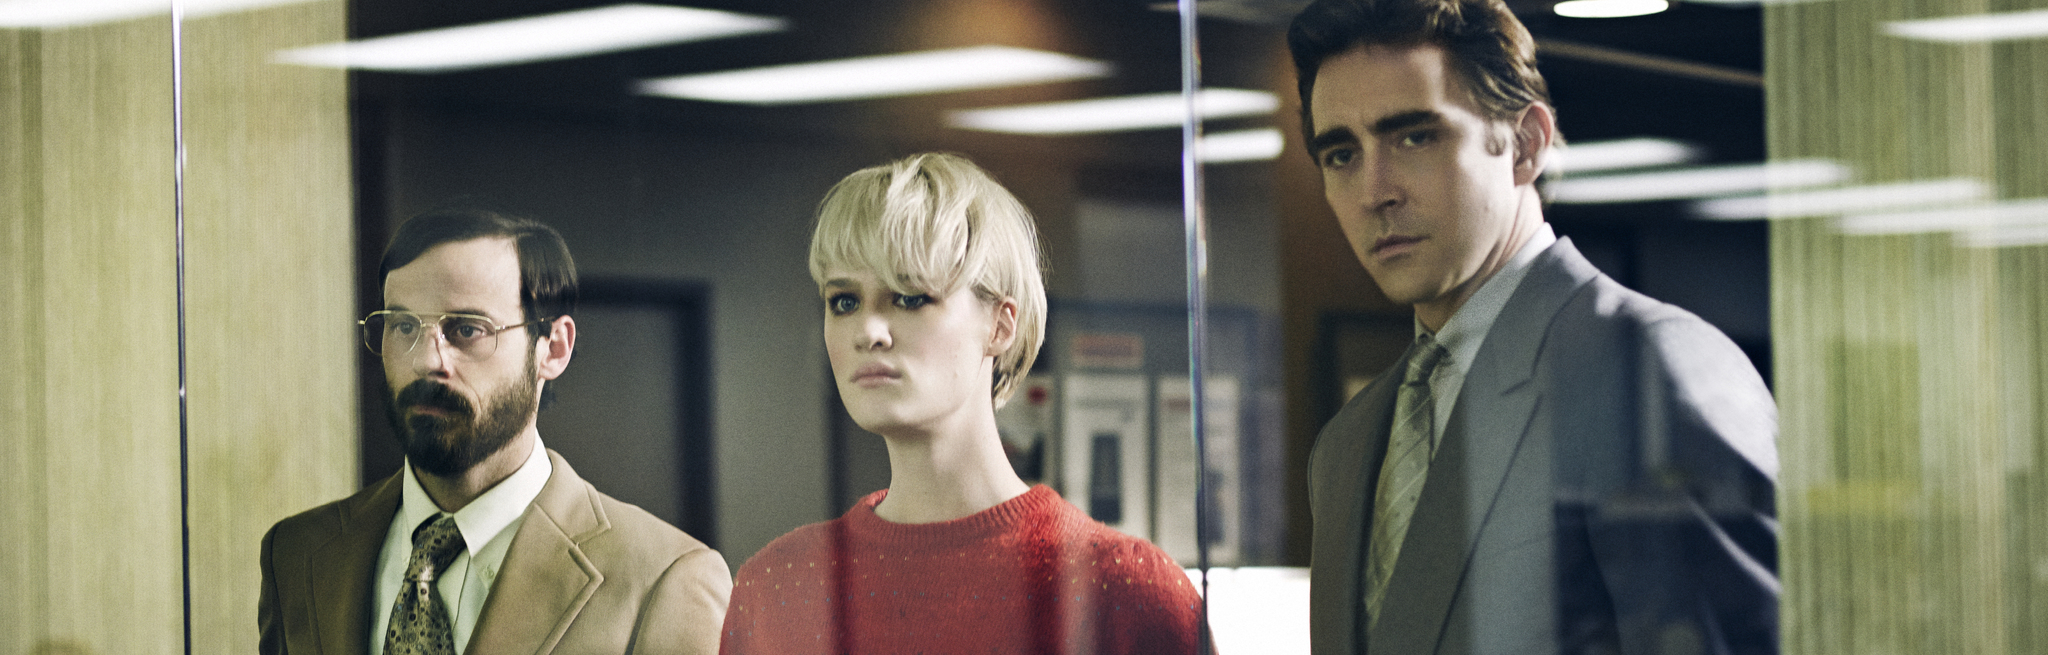 Still of Scoot McNairy, Lee Pace and Mackenzie Davis in Halt and Catch Fire (2014)